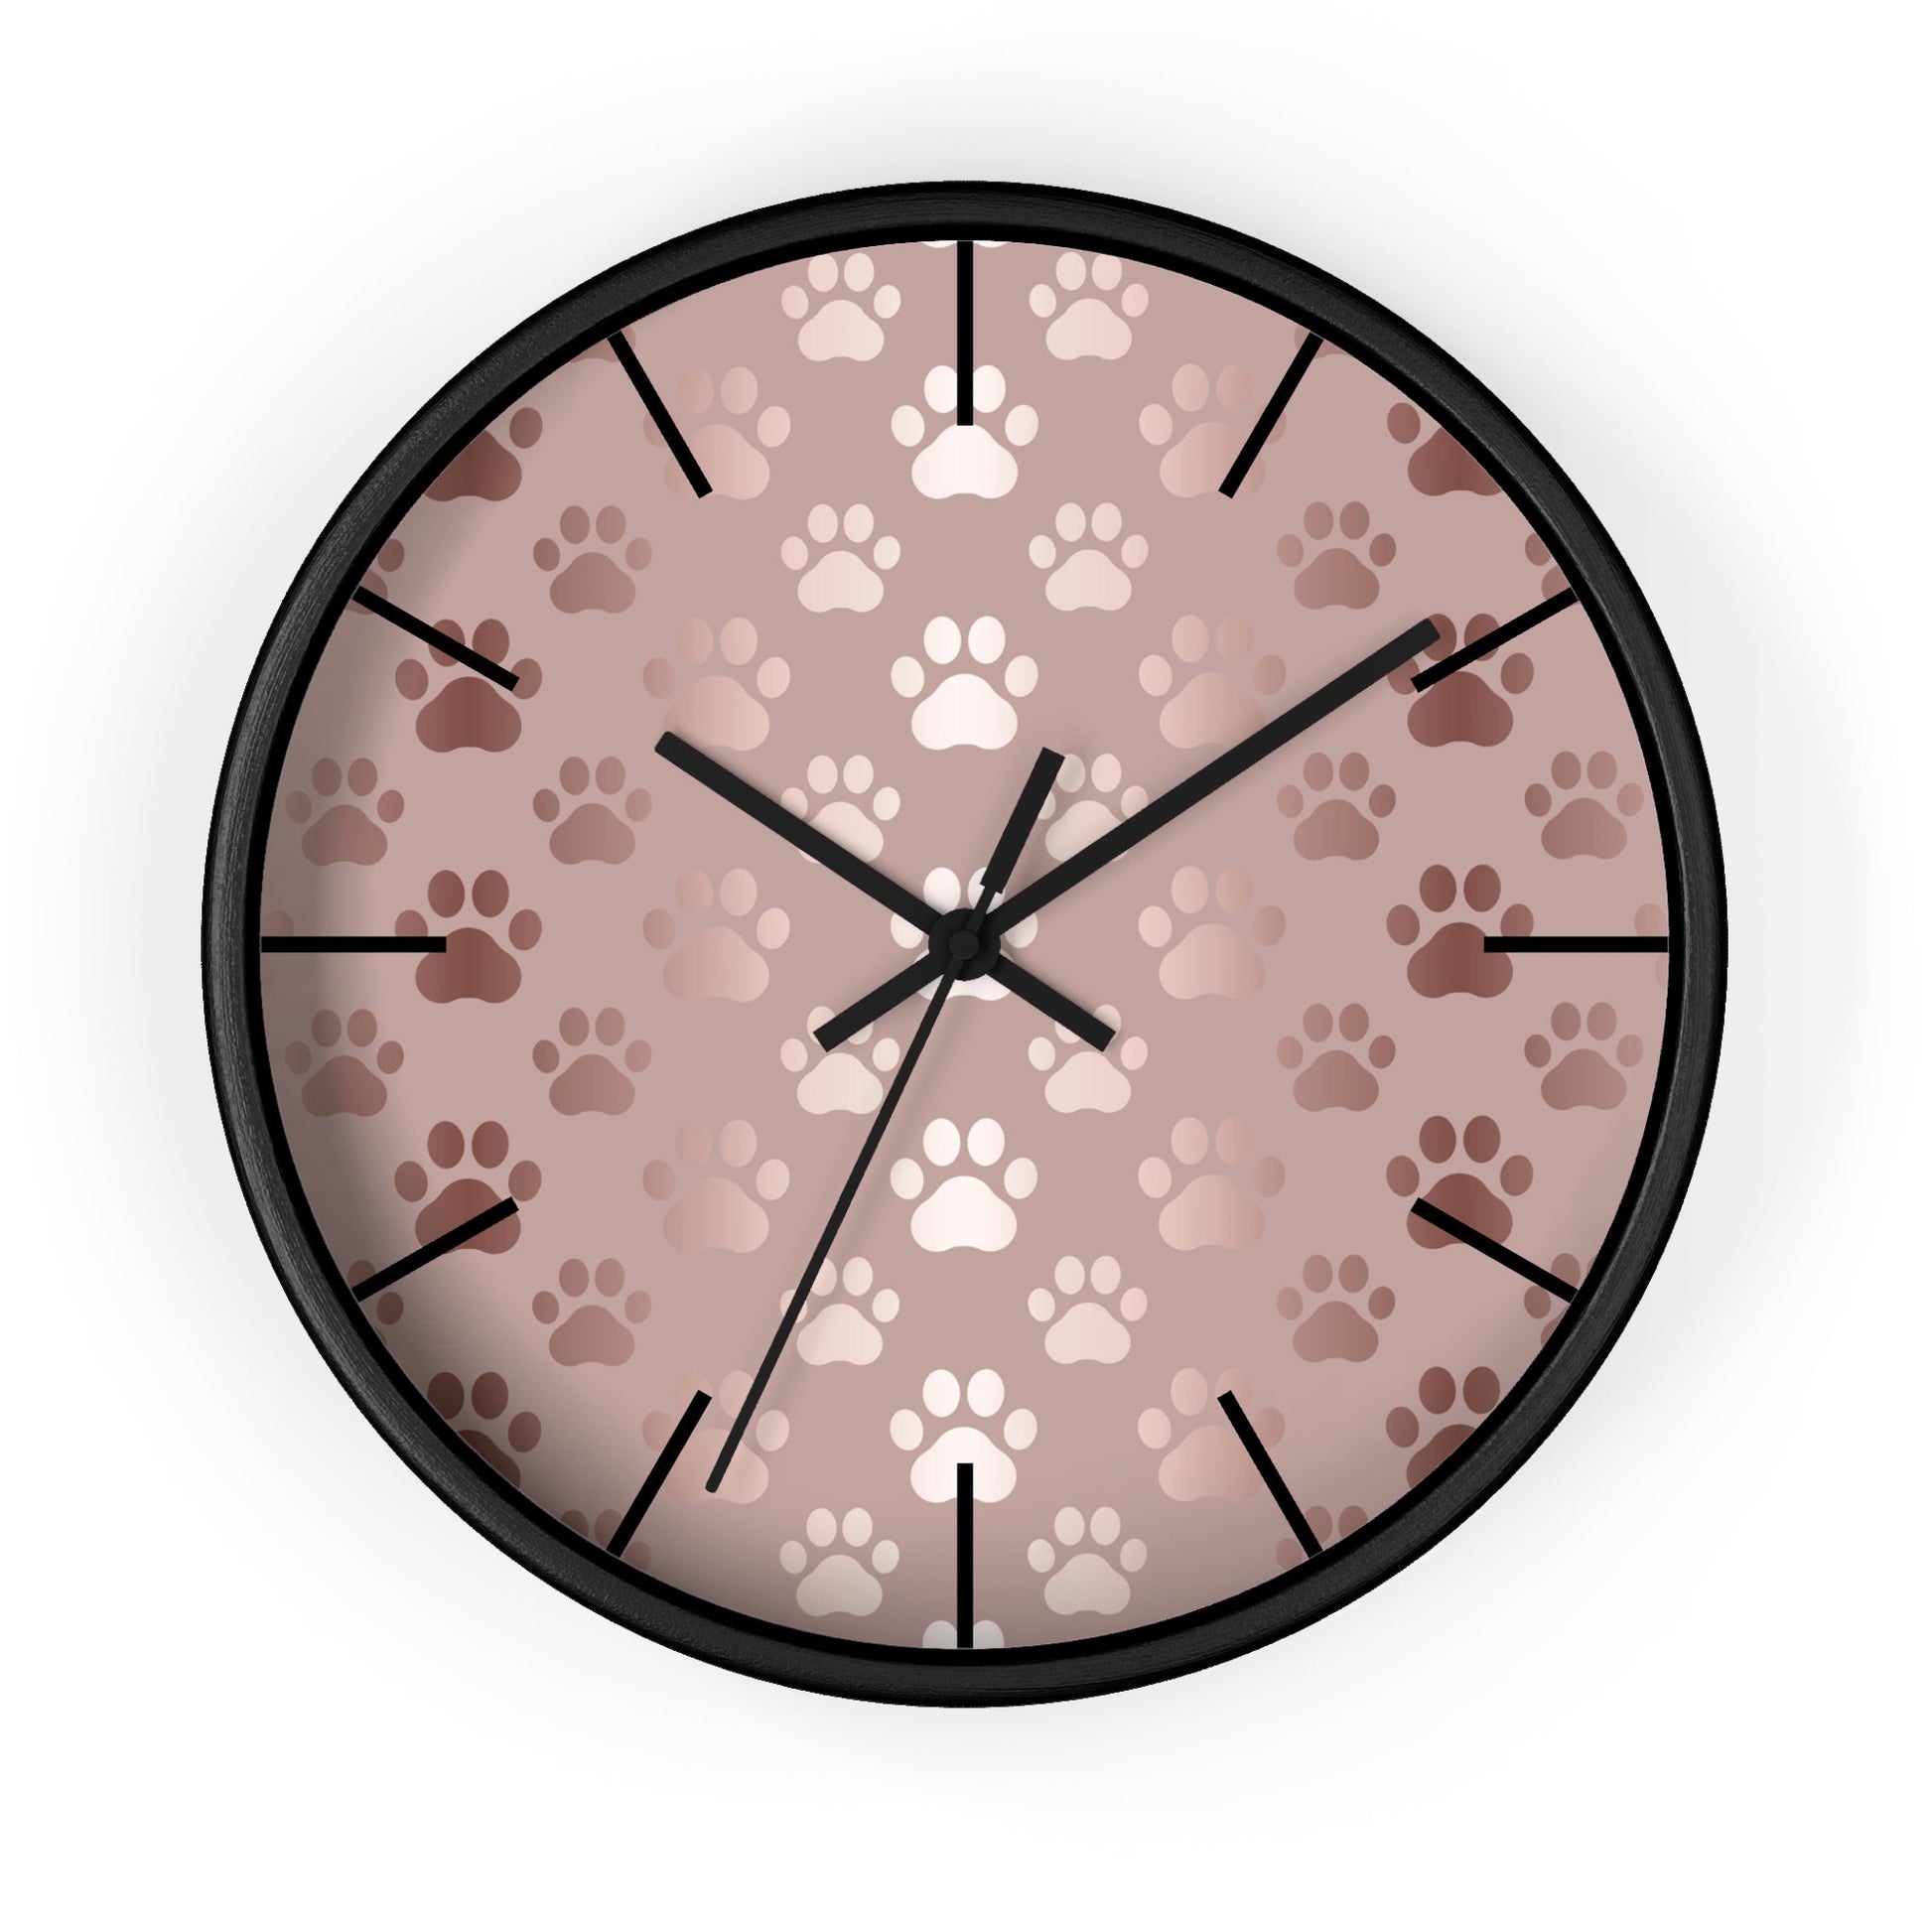 Shimmery Paws Wall Clock - Home Decor - Epileptic Al’s Shop